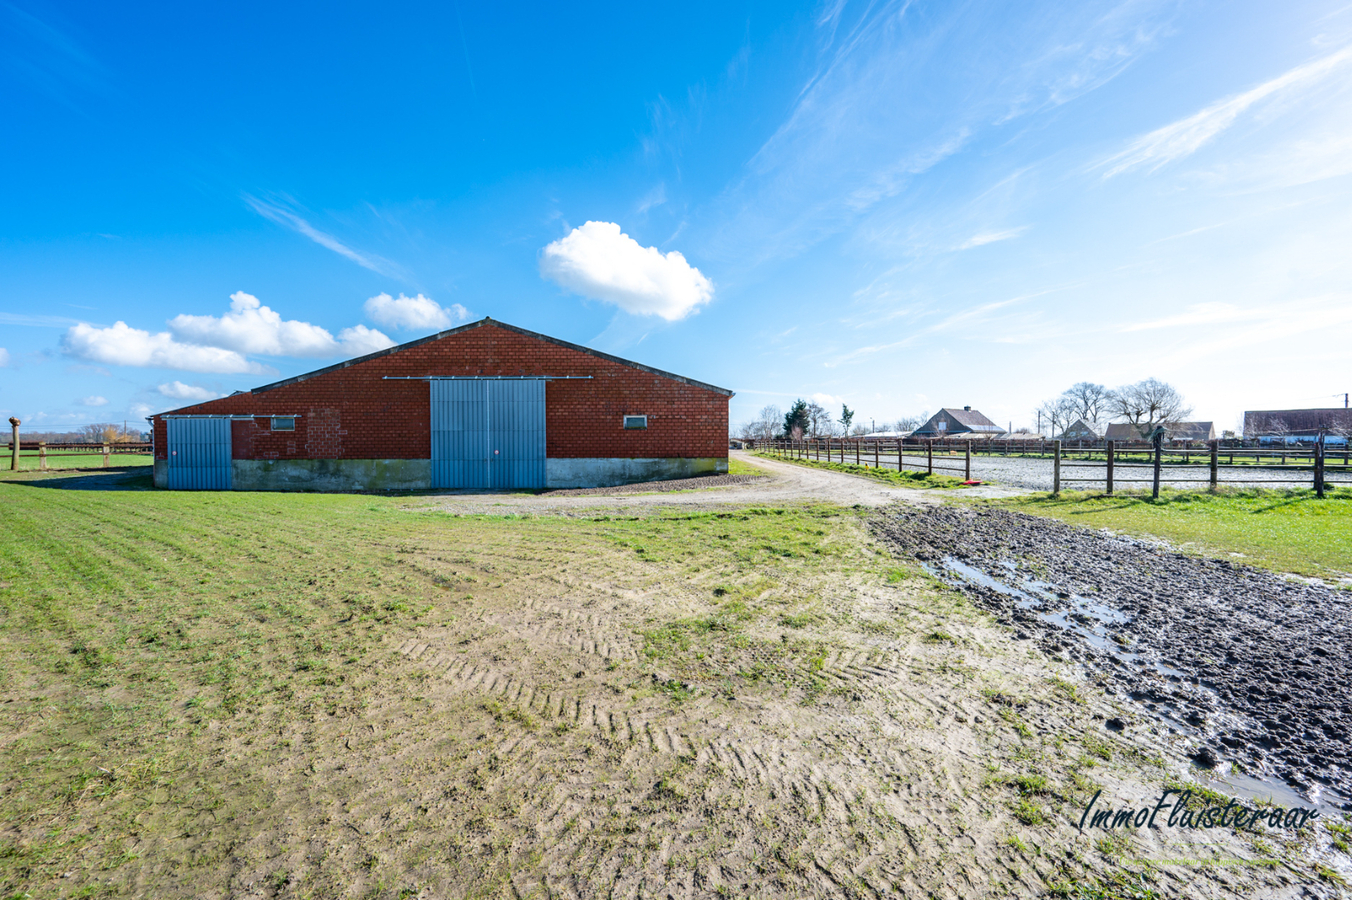 Property for sale |  with option - with restrictions in Koekelare